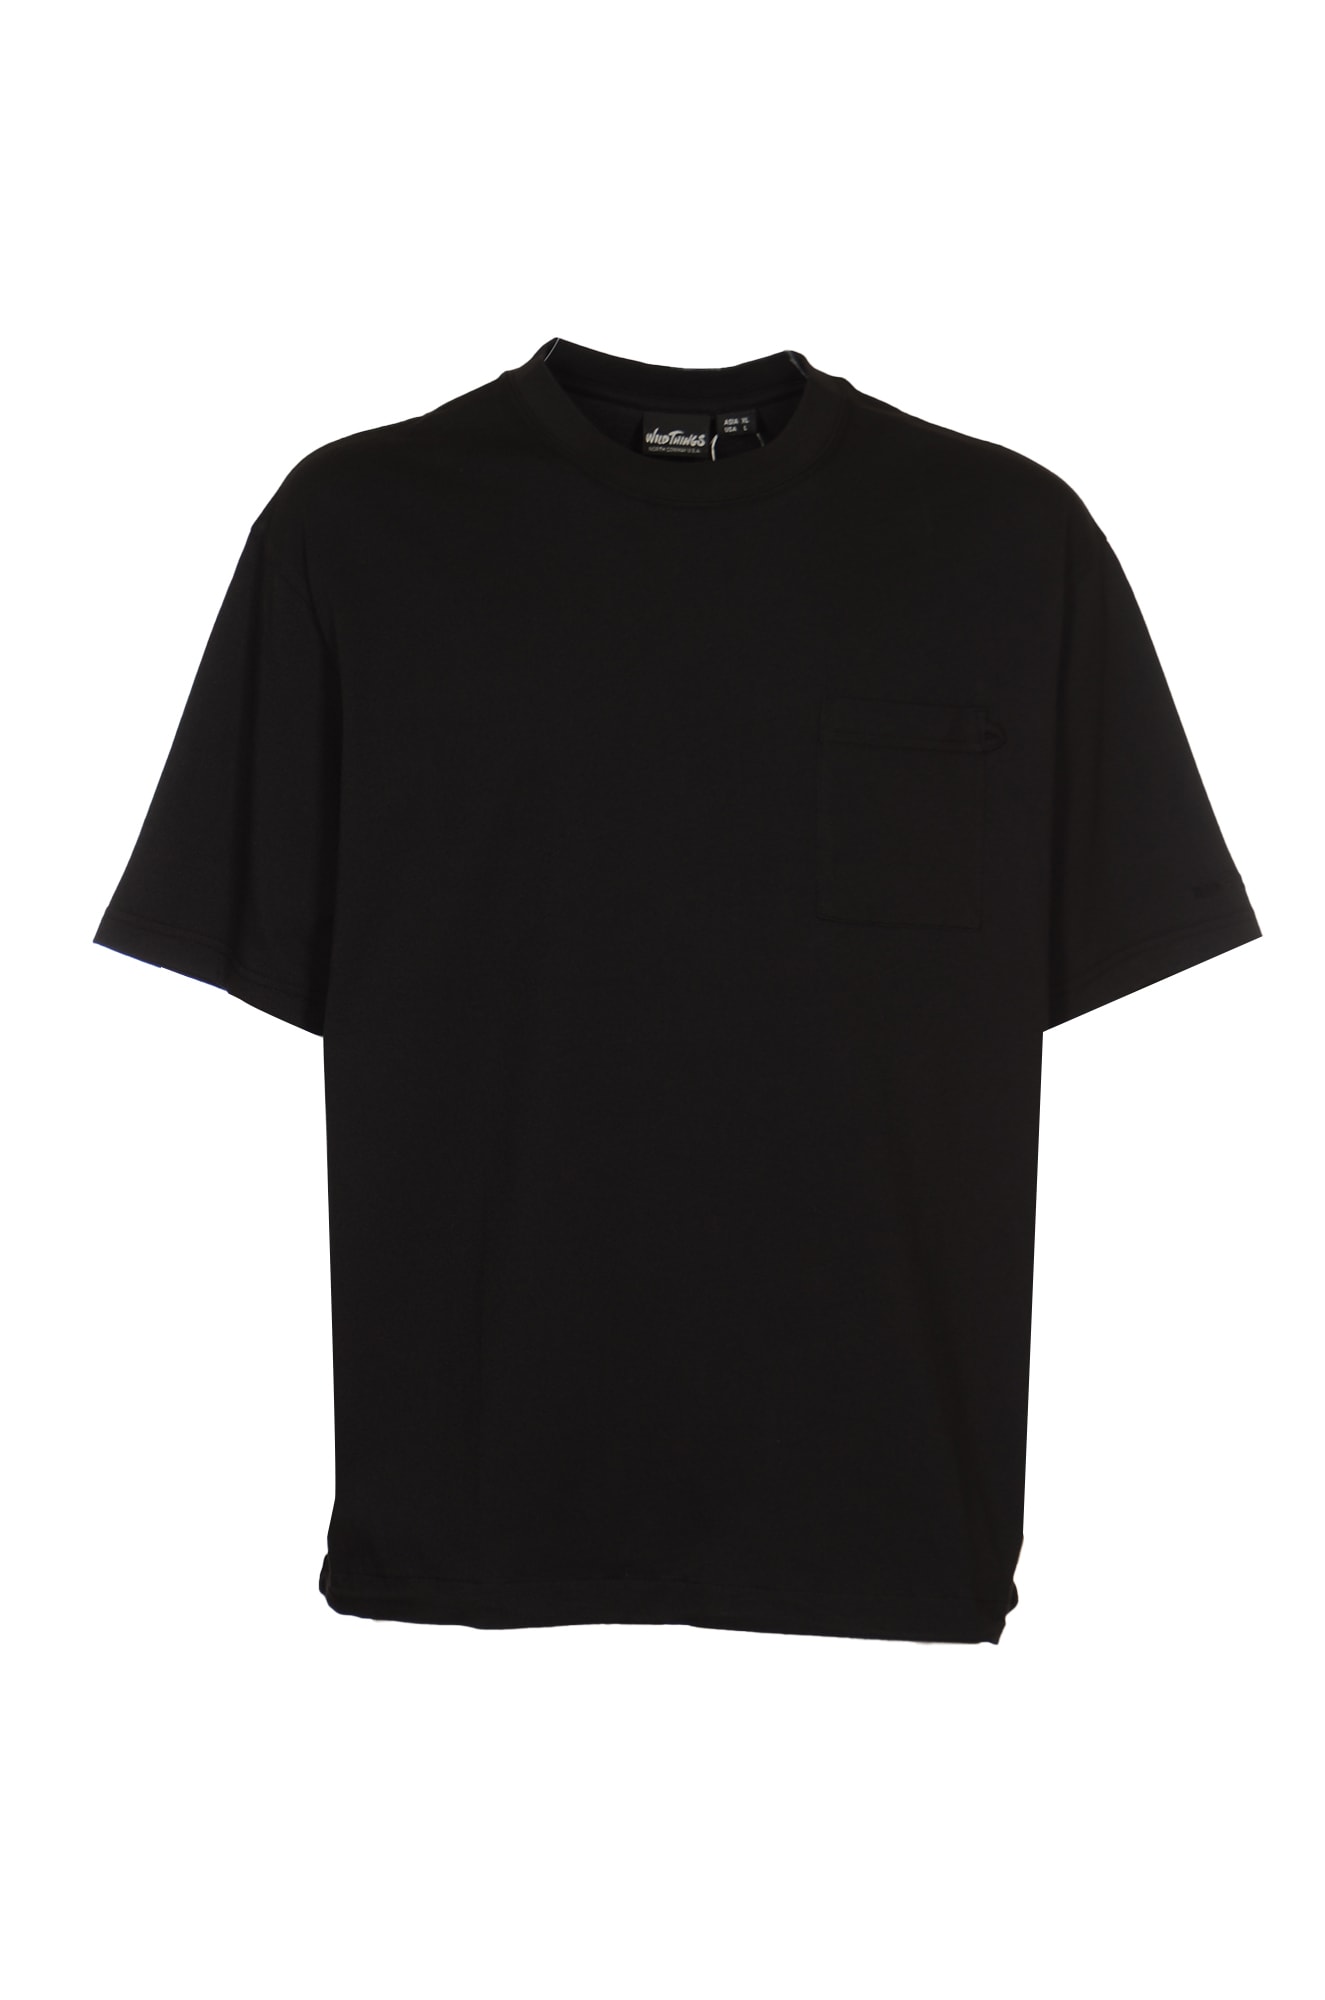 Wild Things City Pocket T-shirt In Black